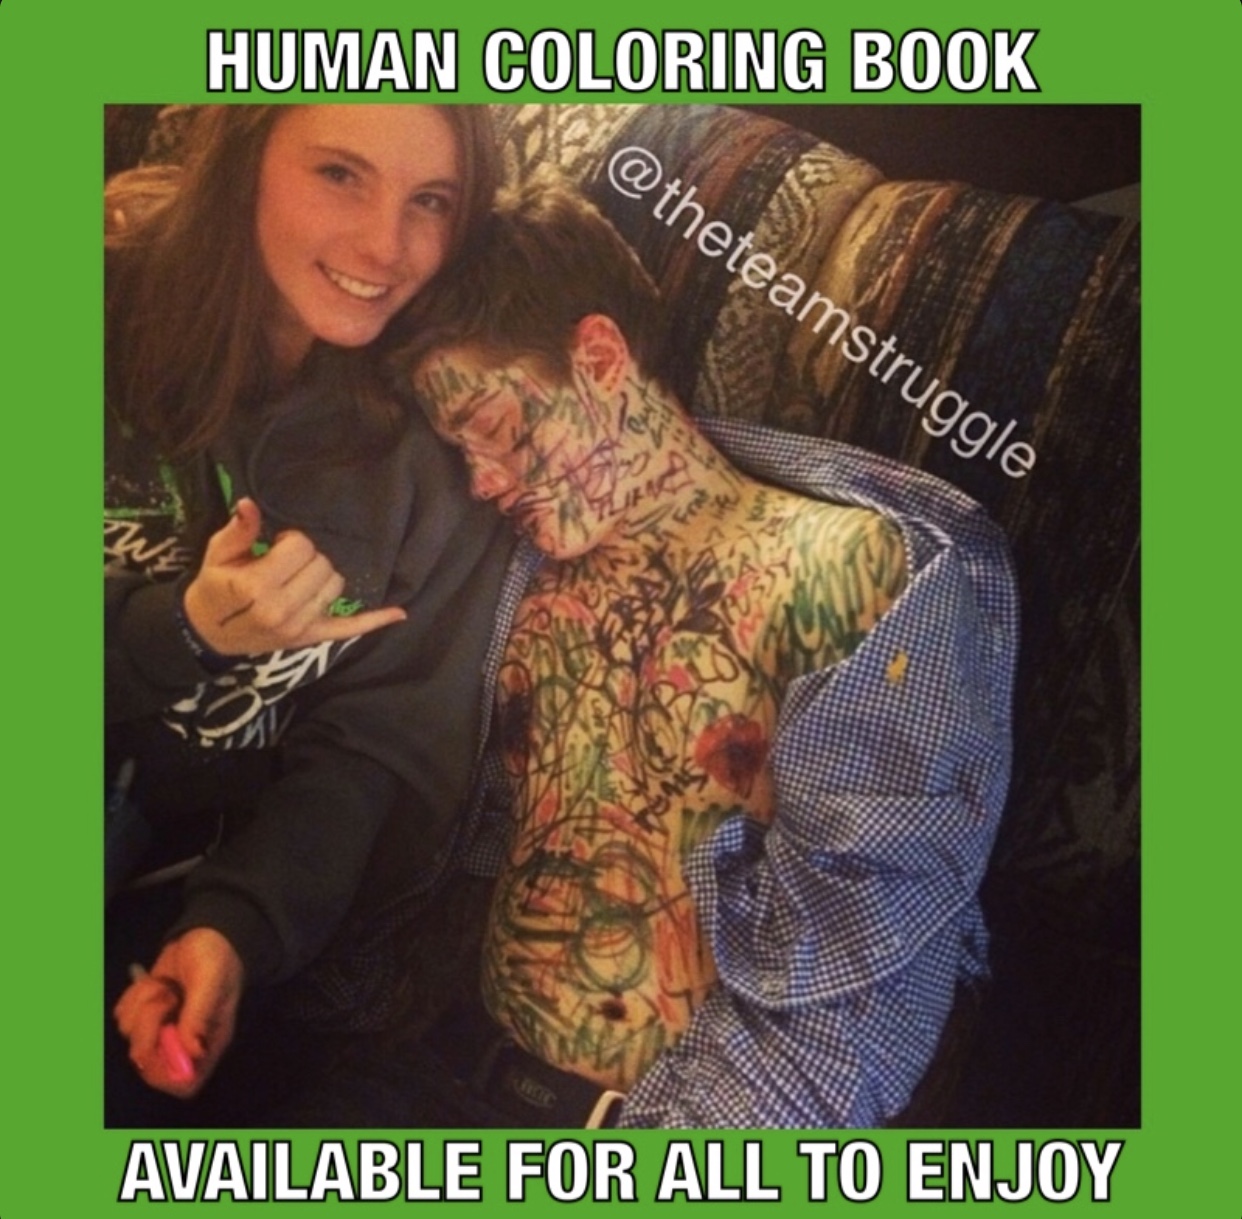 carte de club - Human Coloring Book Available For All To Enjoy